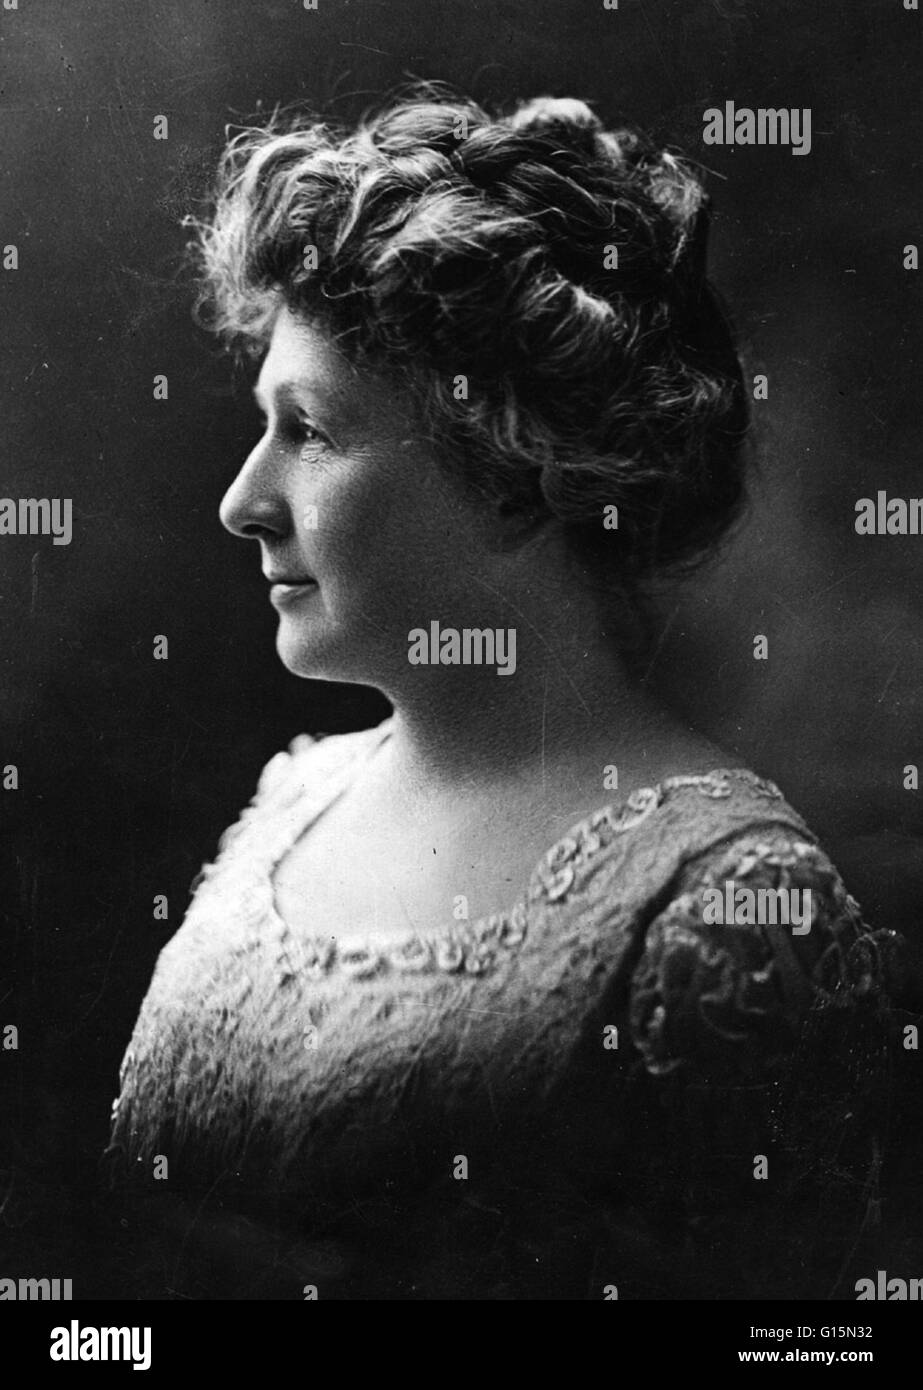 Portrait taken in 1922. Annie Jump Cannon (December 11, 1863 - April 13, 1941) was an American astronomer. In 1880 Cannon was sent to Wellesley College in Massachusetts, during which time she was stricken with scarlet fever and became almost completely de Stock Photo